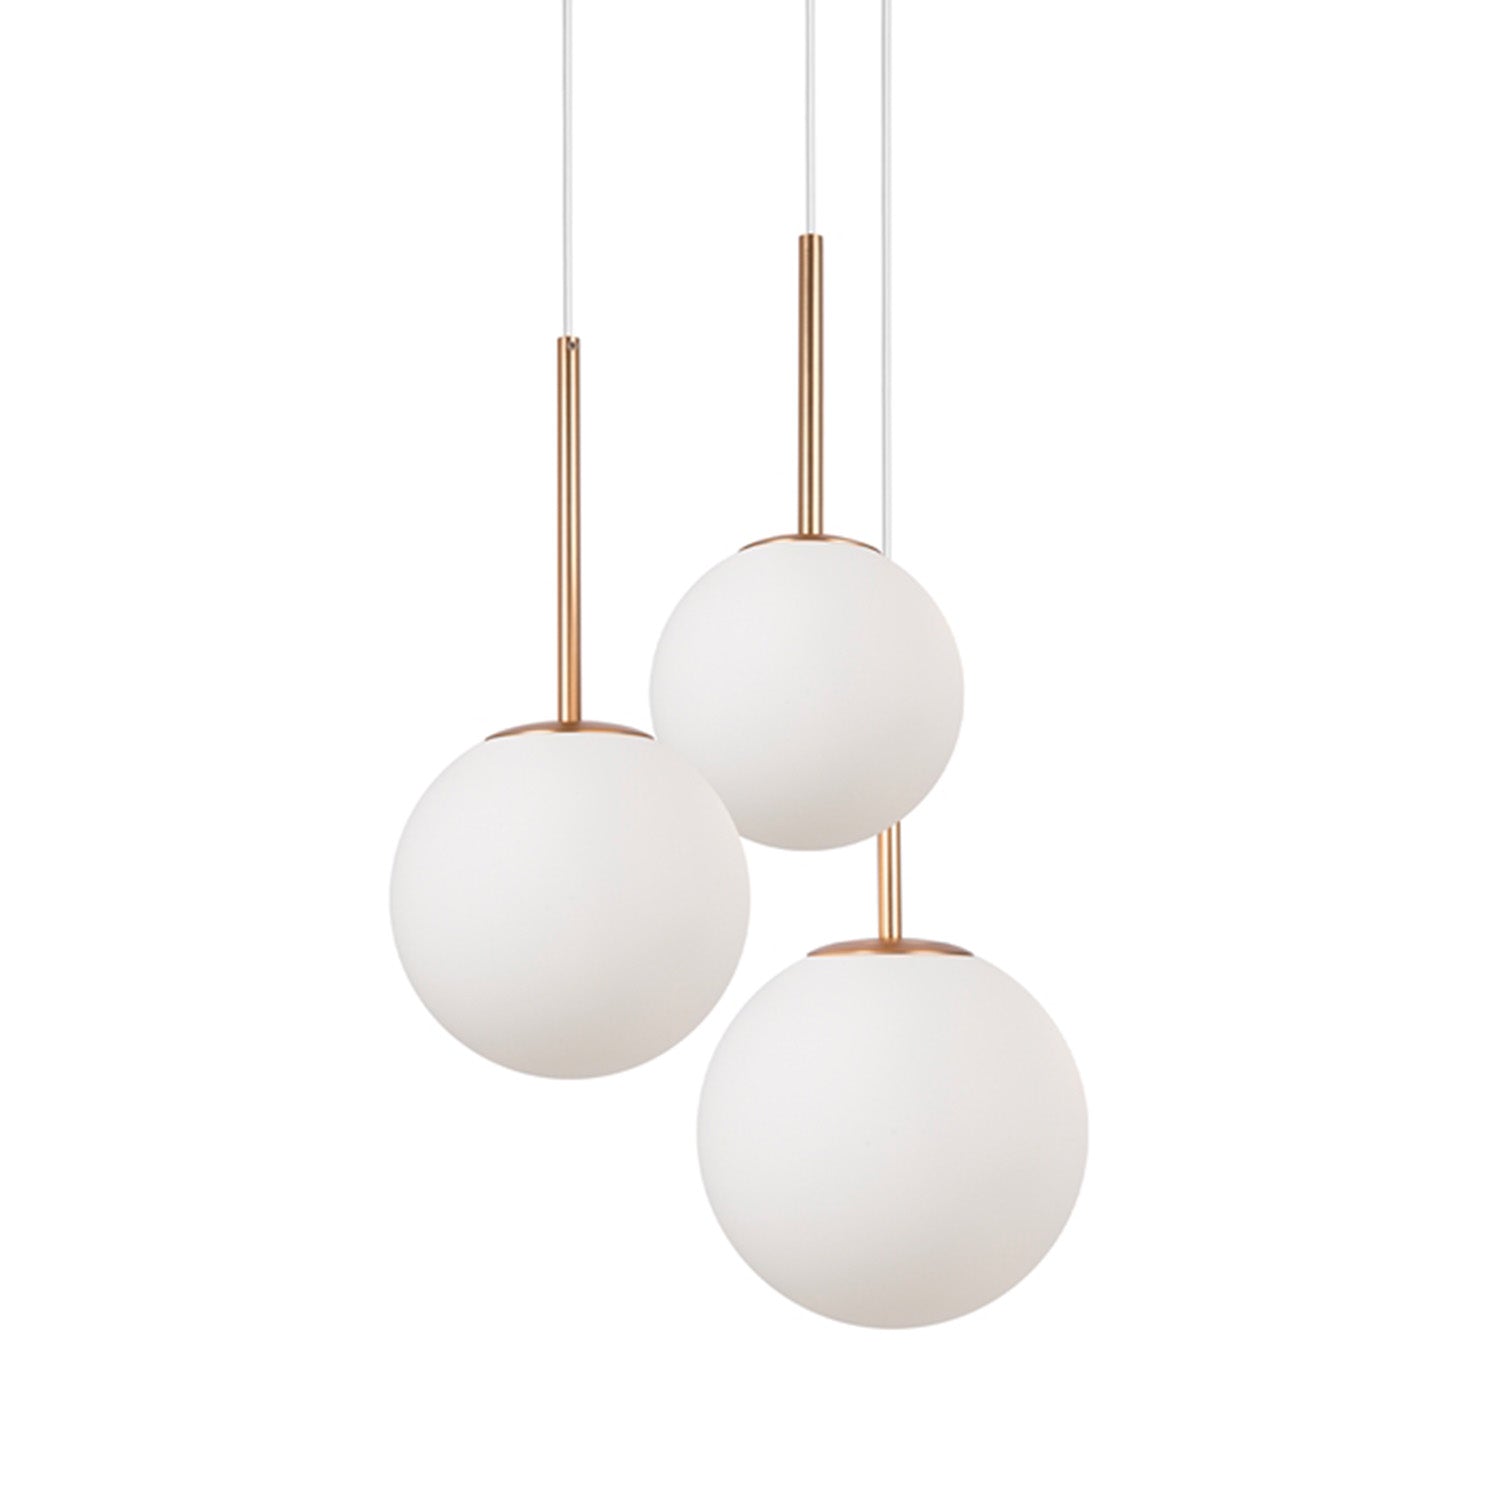 BASIC FORM 3 - Gold, black or white pendant light and opaque glass balls